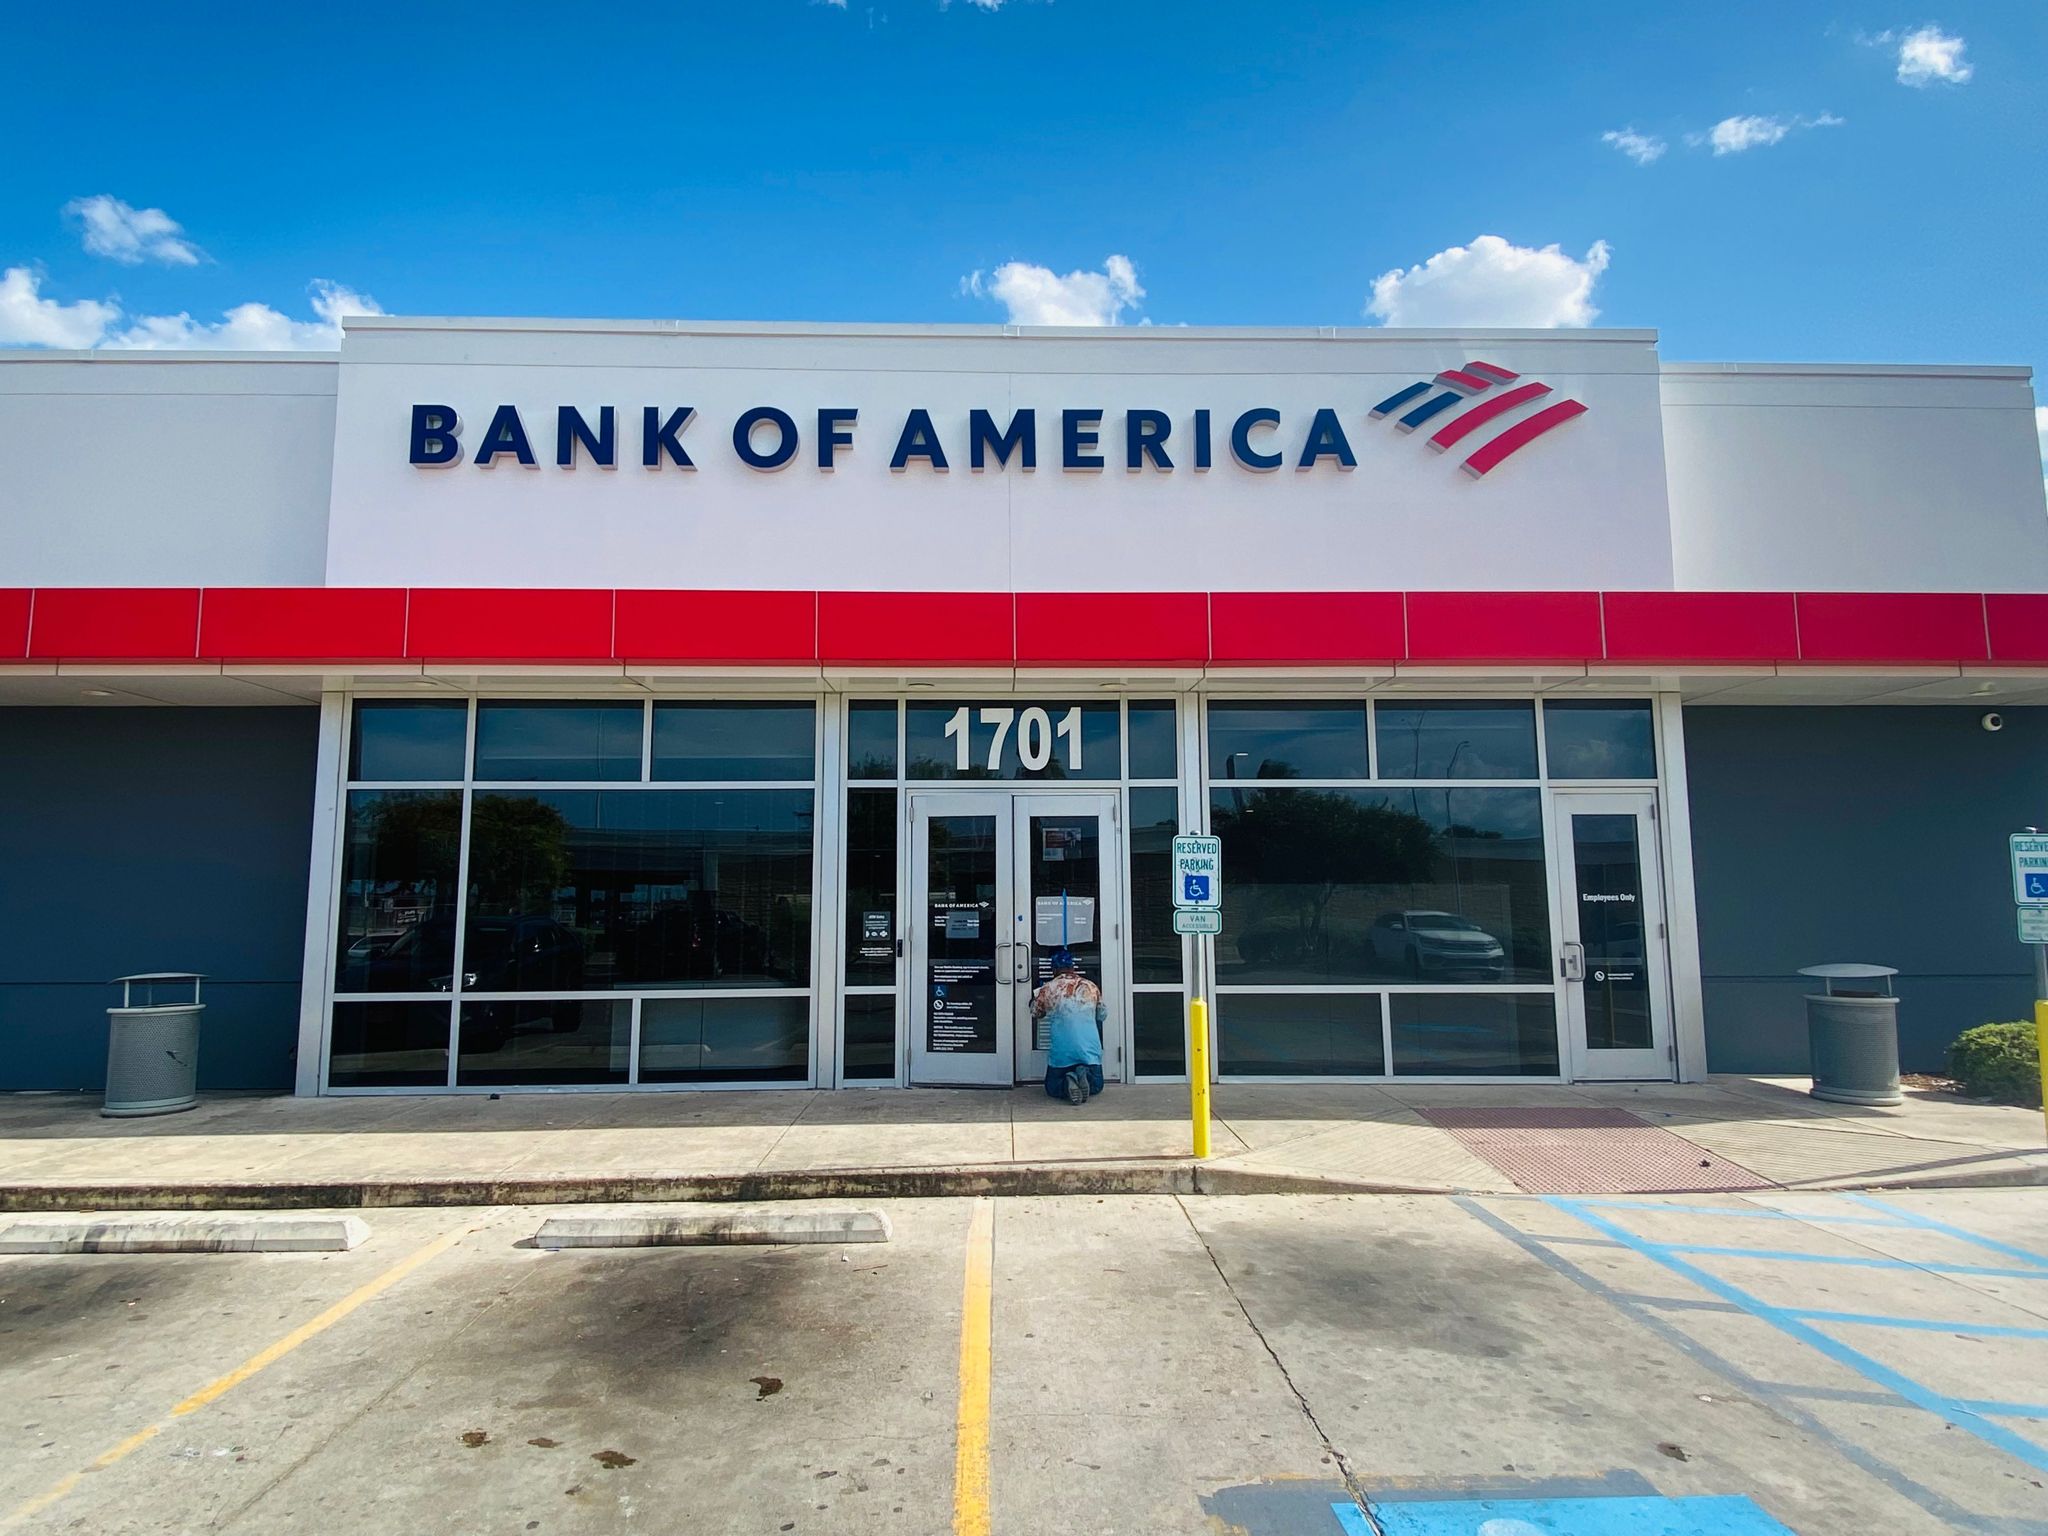 We delivered a corporate identity signage project, enhancing Bank of America's storefront with precision and clarity.